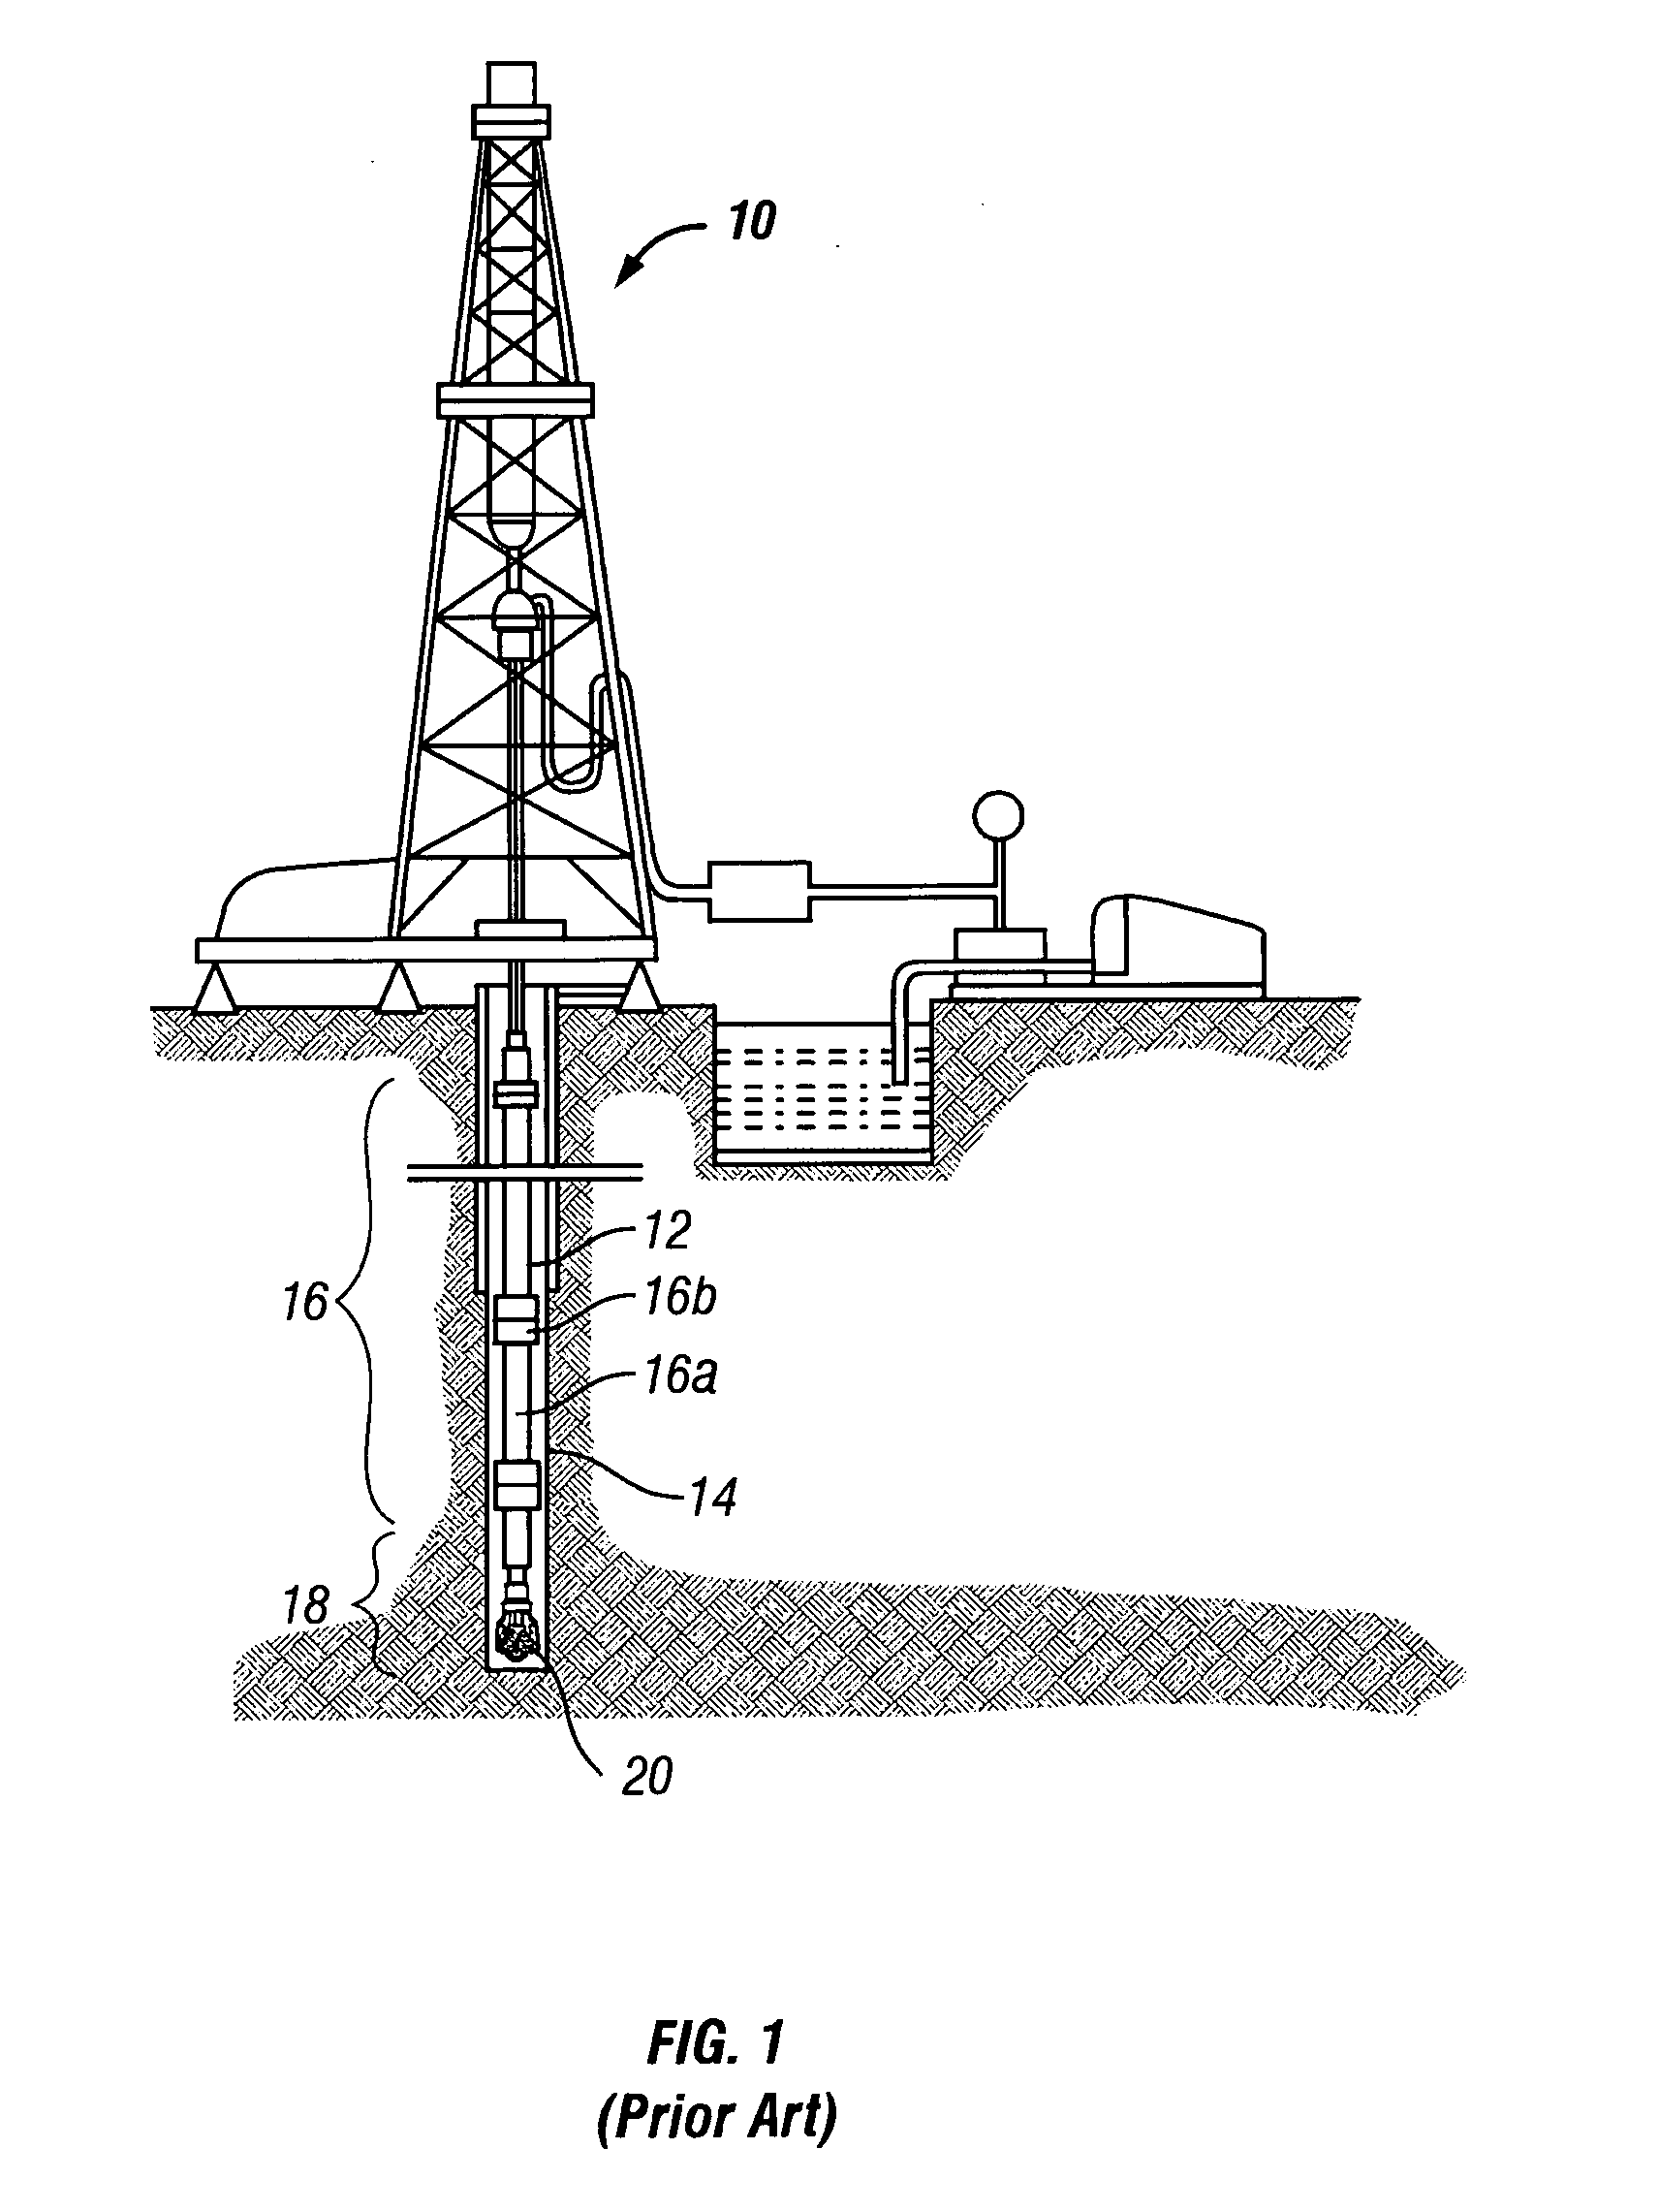 Methods for modeling, designing, and optimizing the performance of drilling tool assemblies